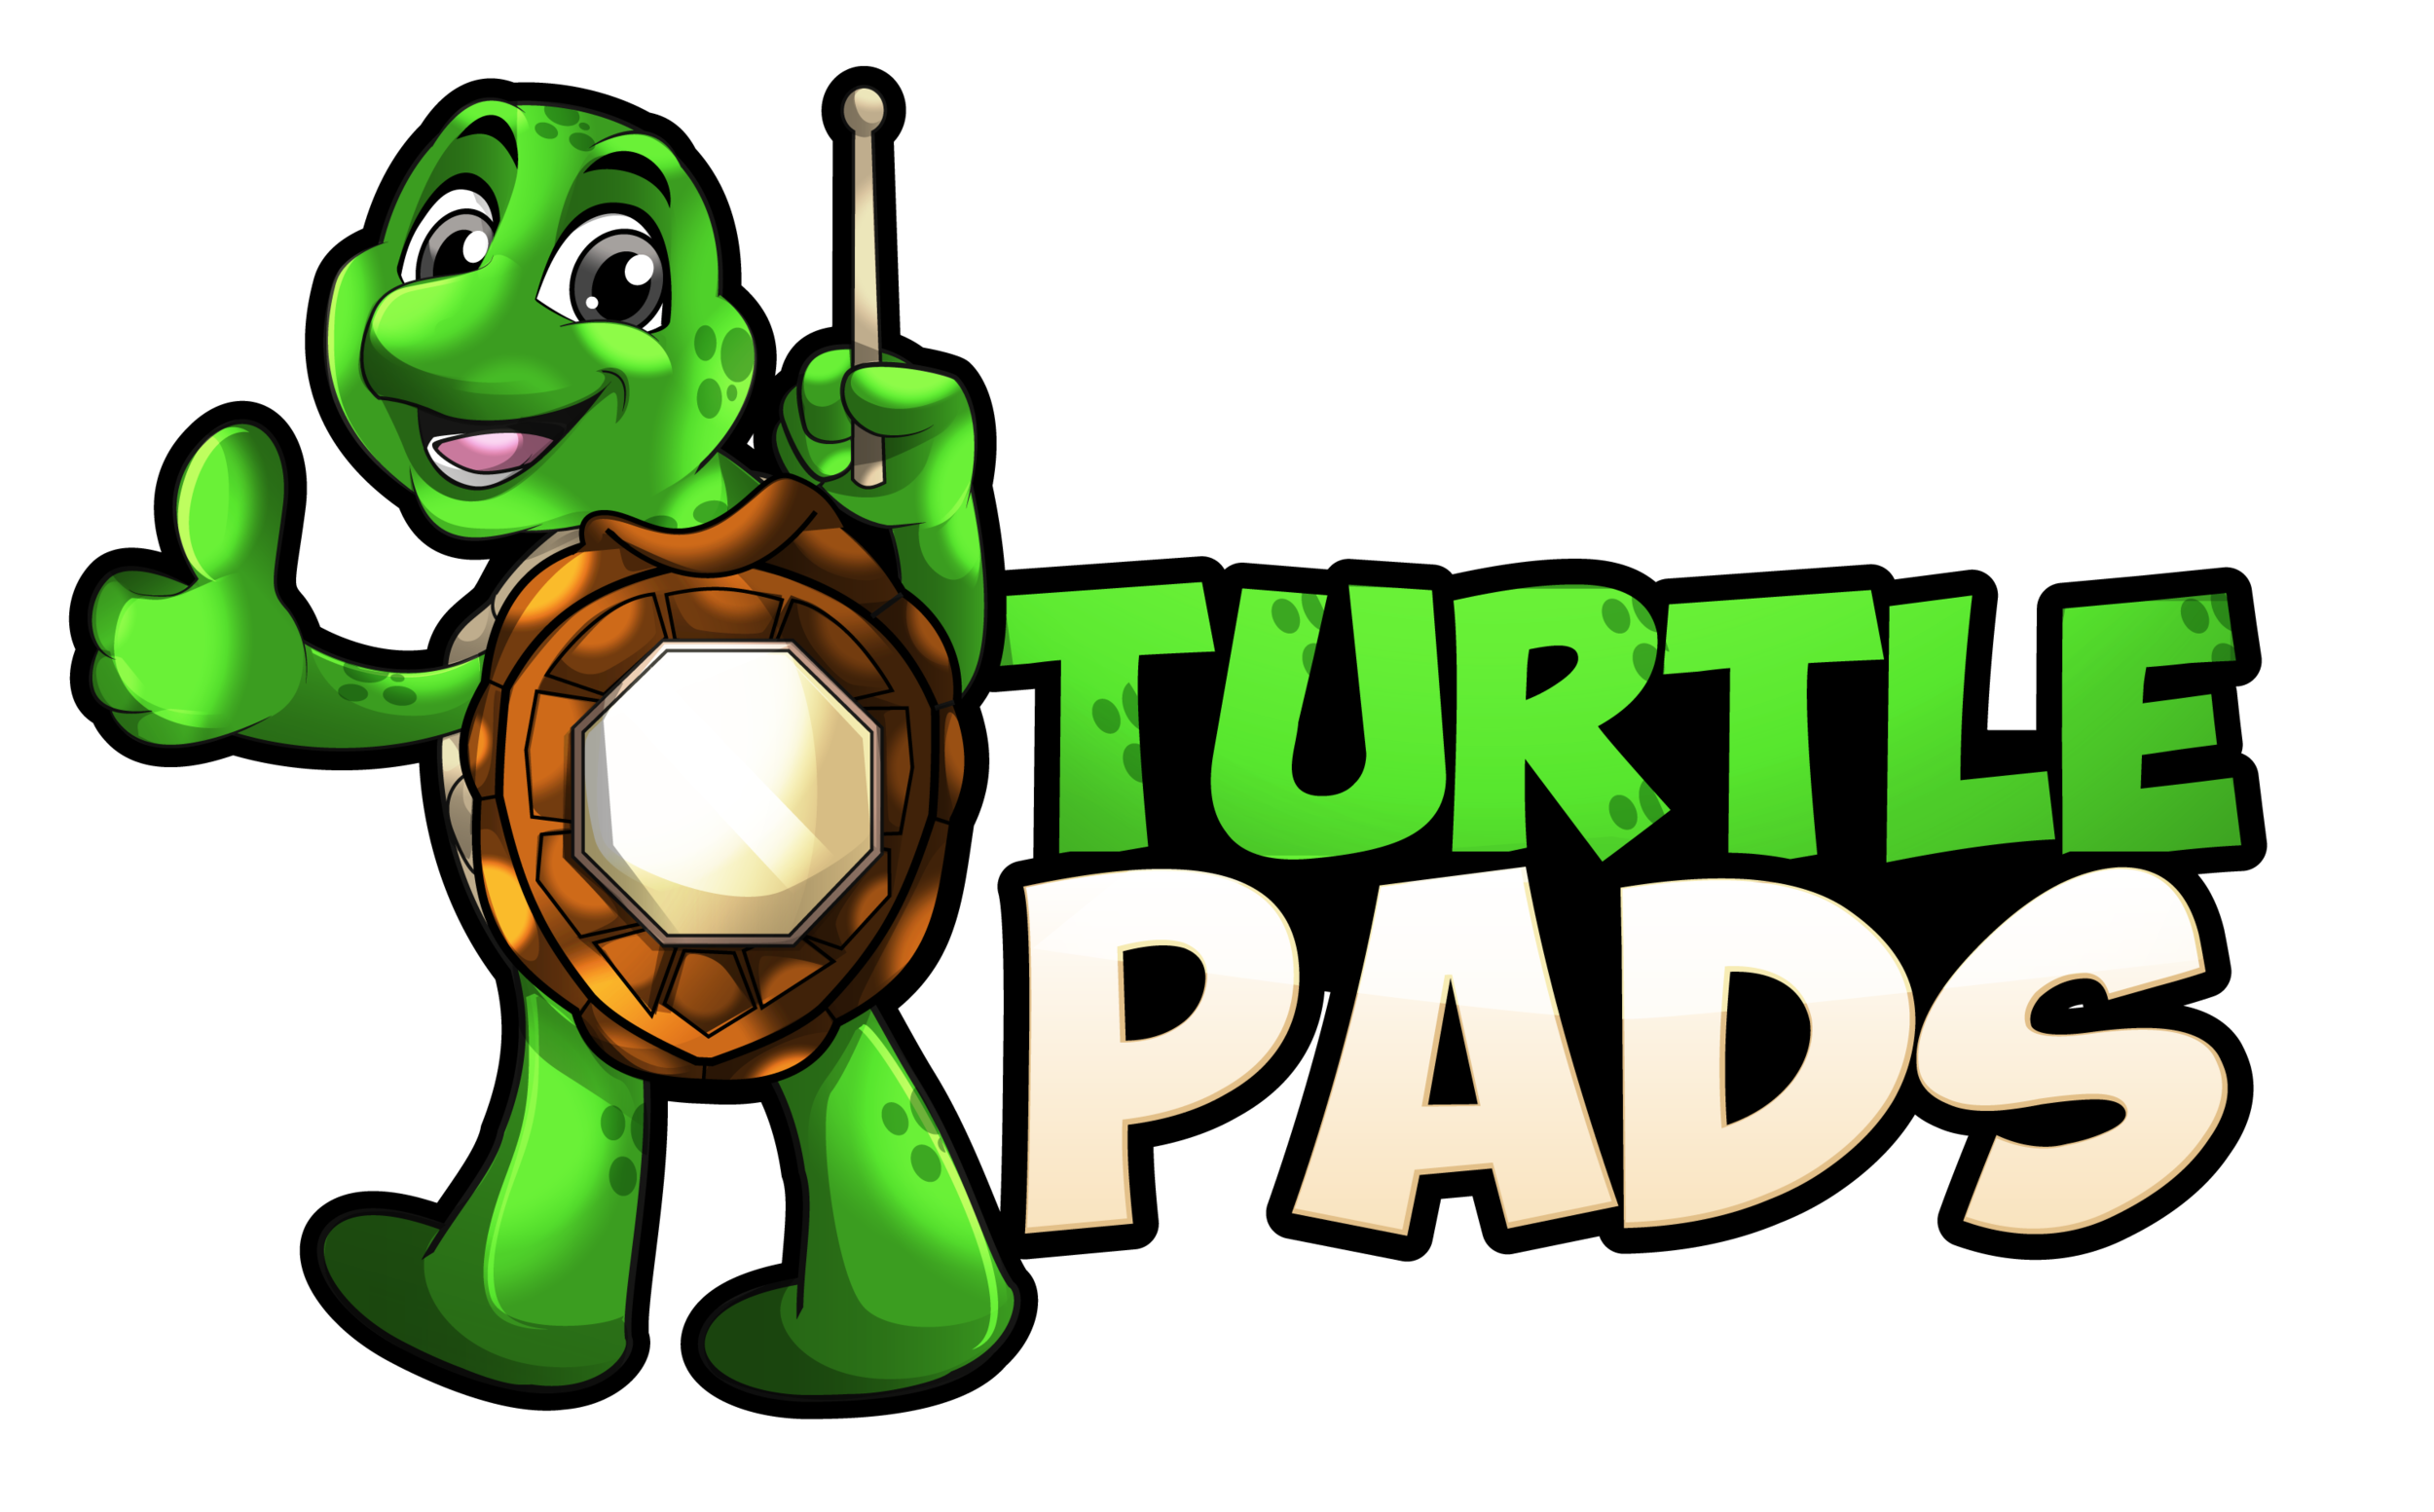 Turtle Pads is a drumming practice pad designed for percussionists on-the-go.&nbsp;Every pad sold helps save 10 baby turtles.